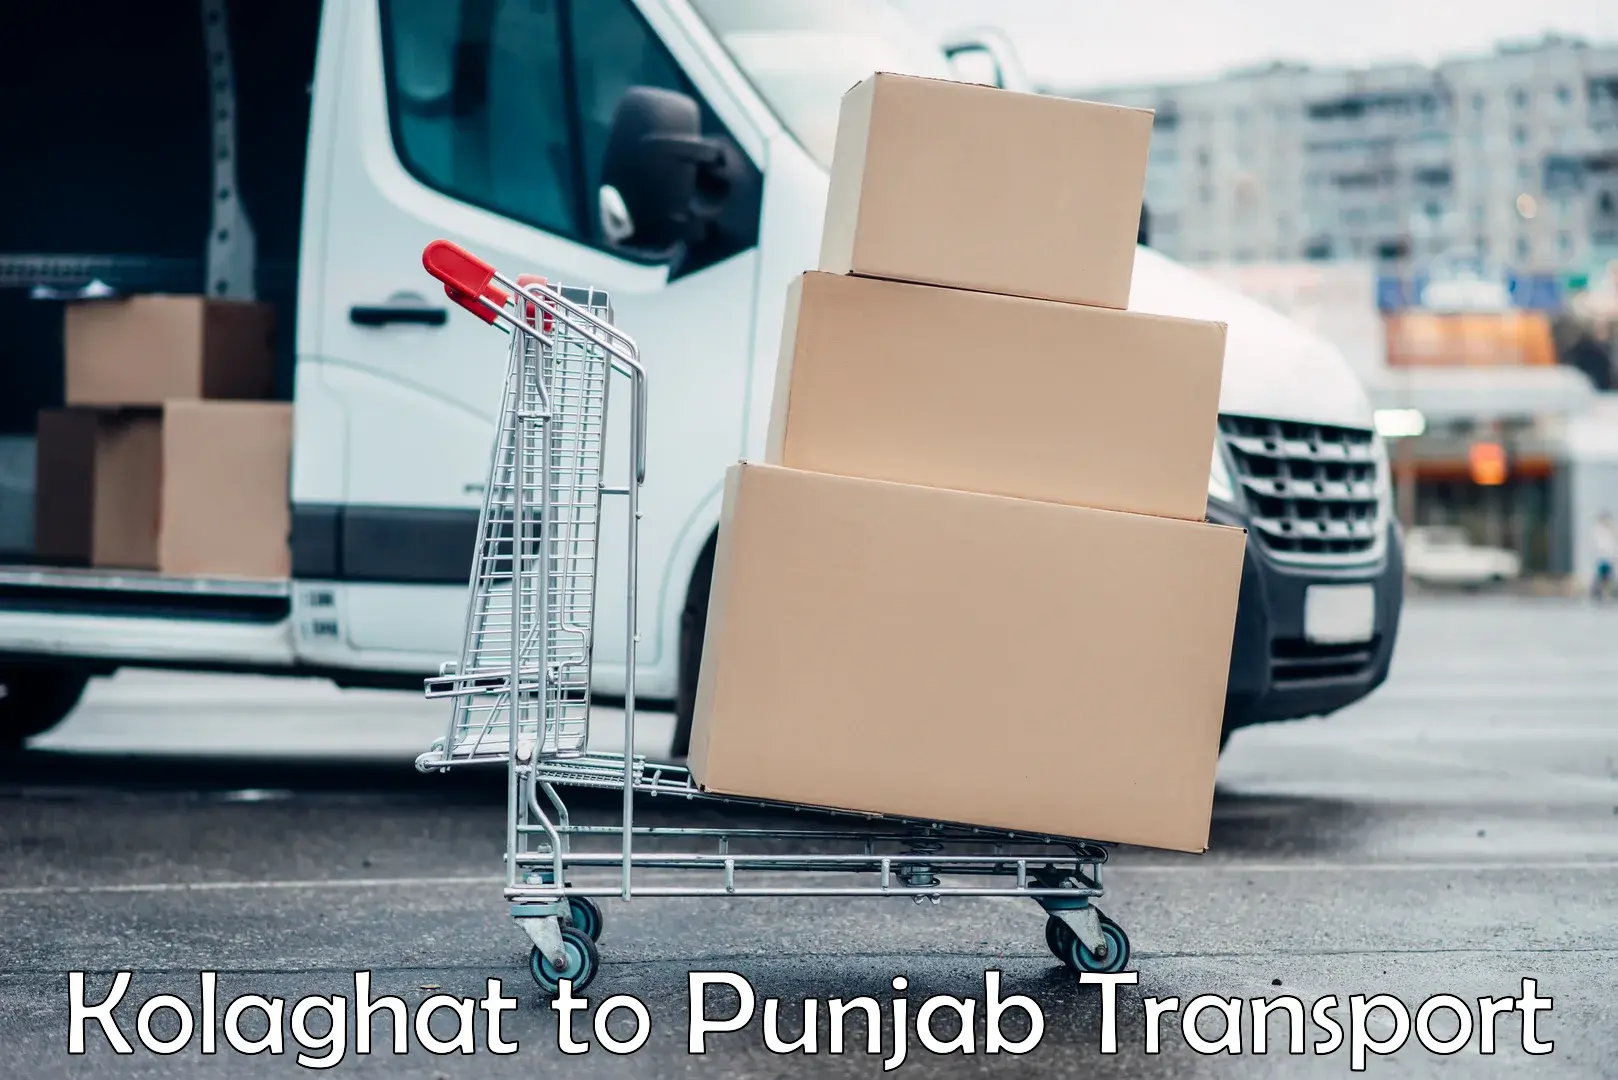 Nationwide transport services Kolaghat to Patiala